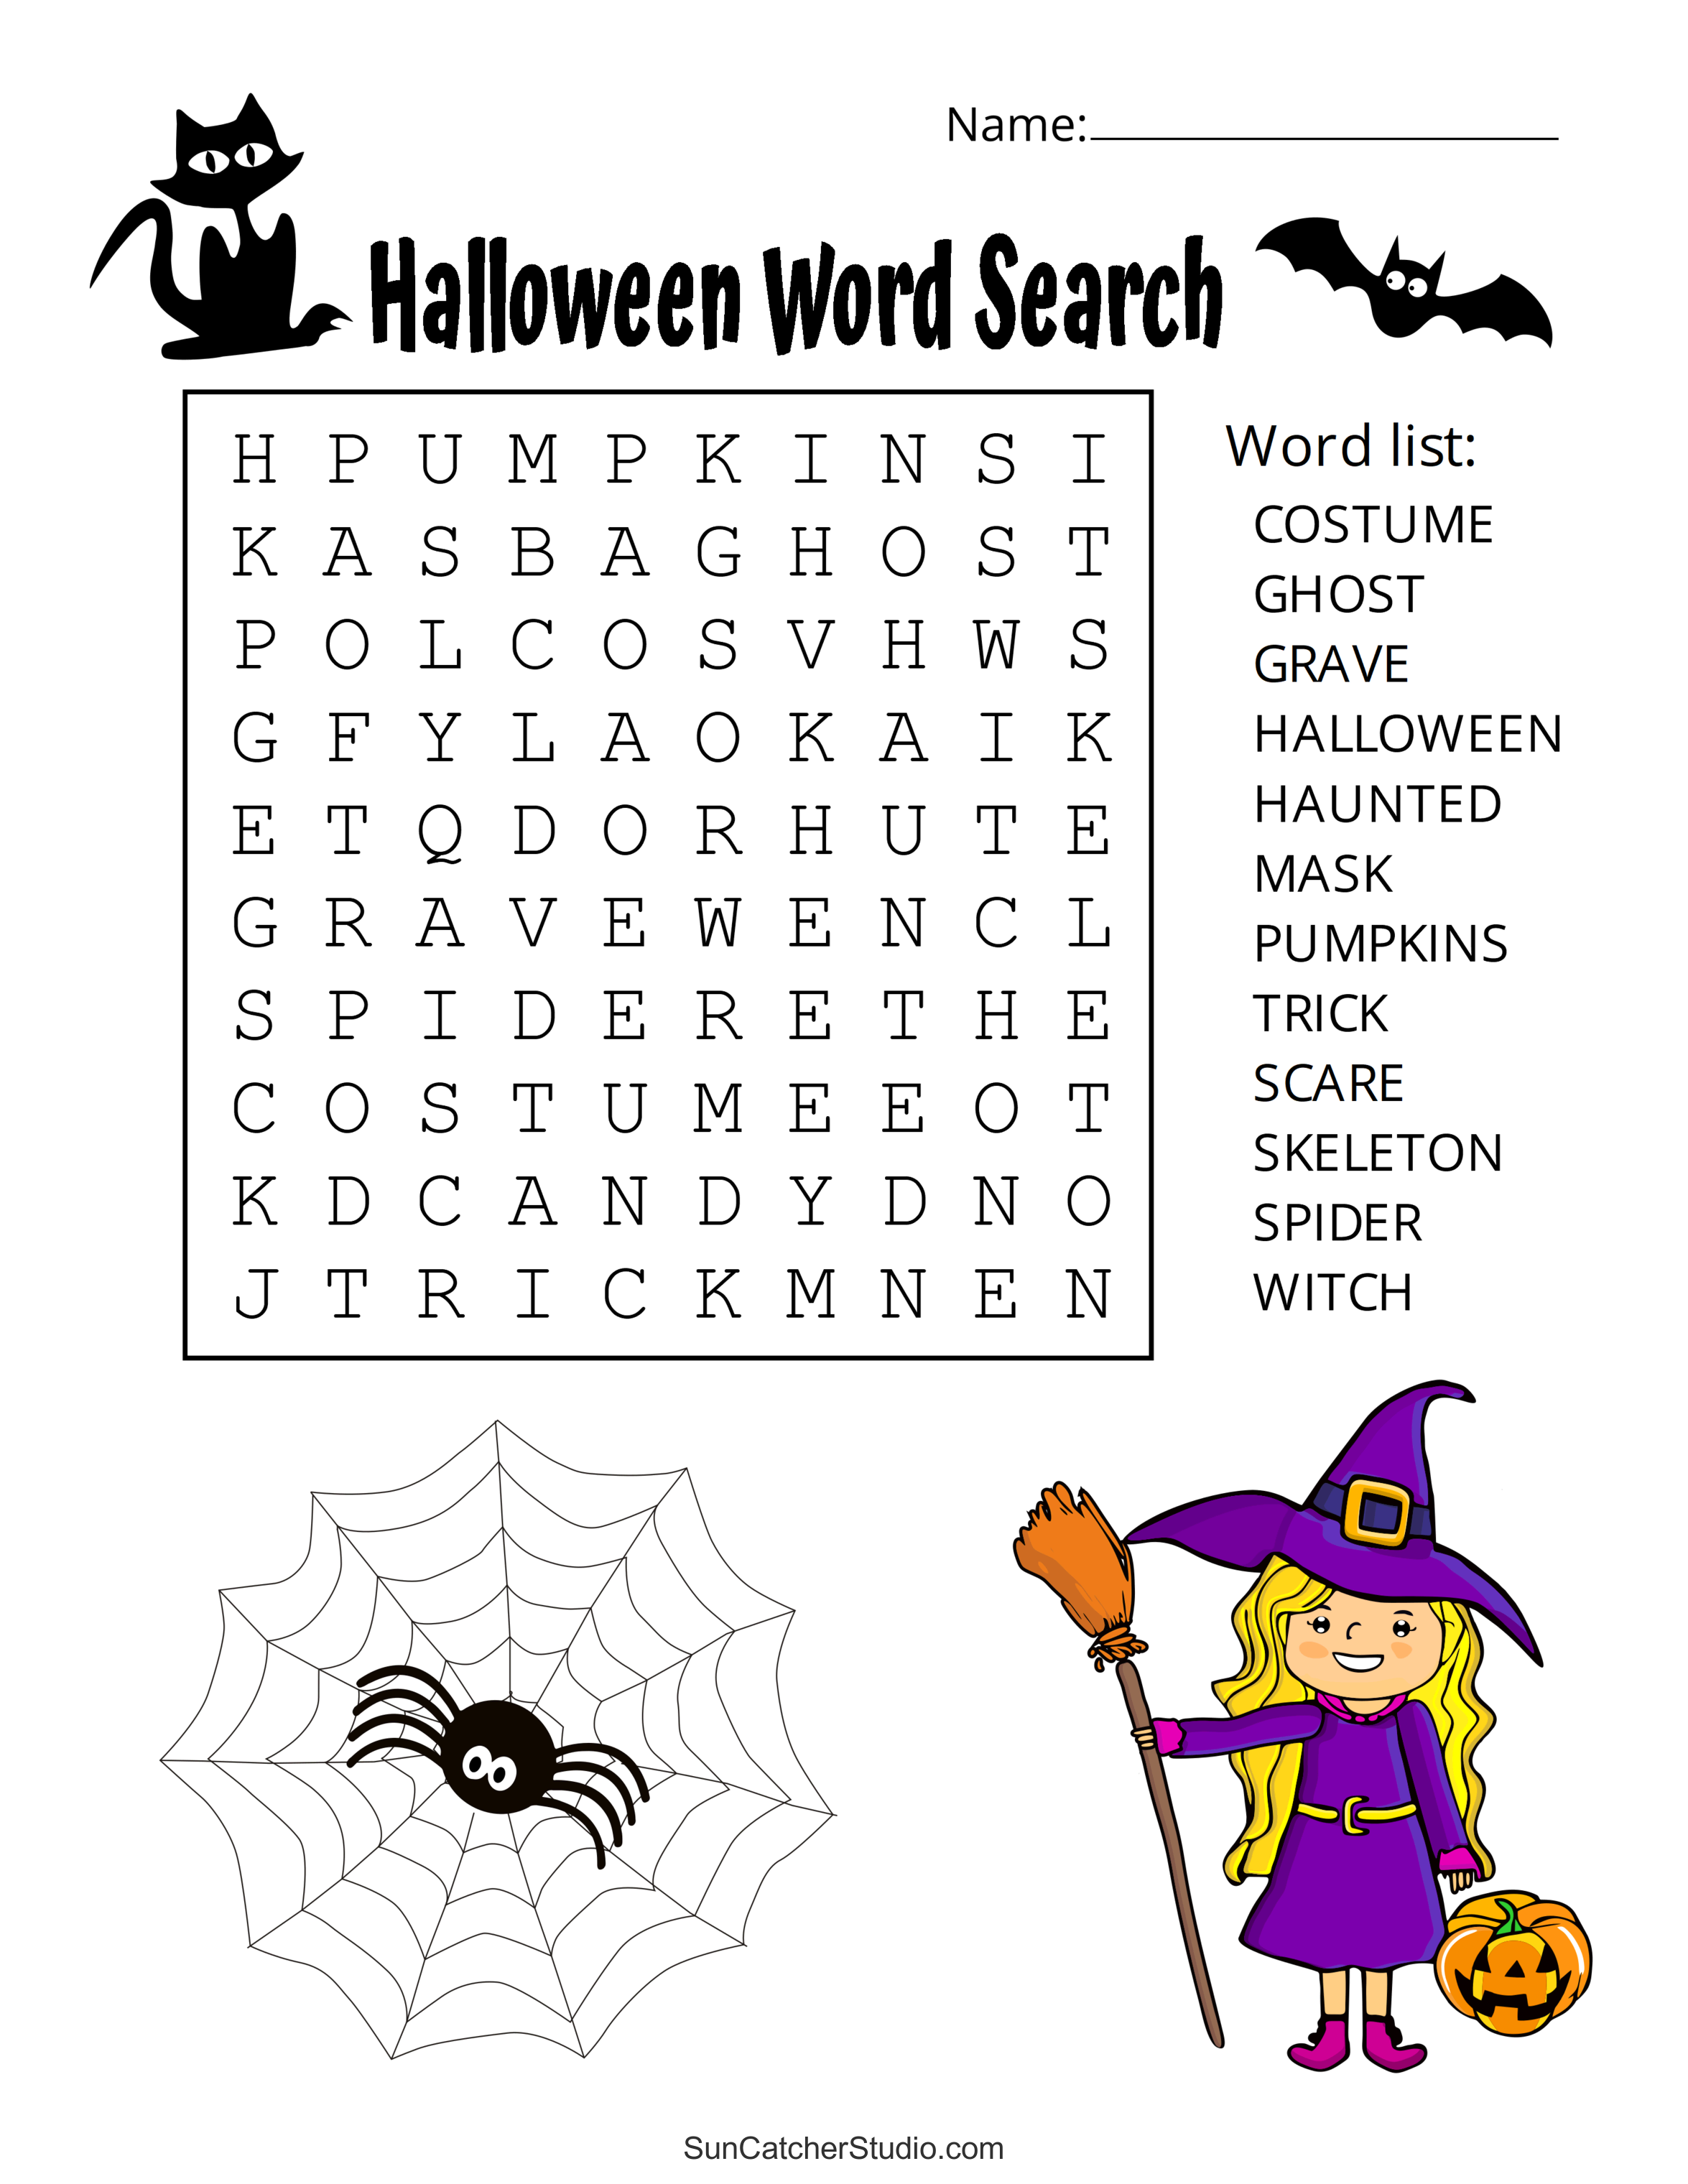 halloween-word-search-free-printable-puzzles-diy-projects-patterns